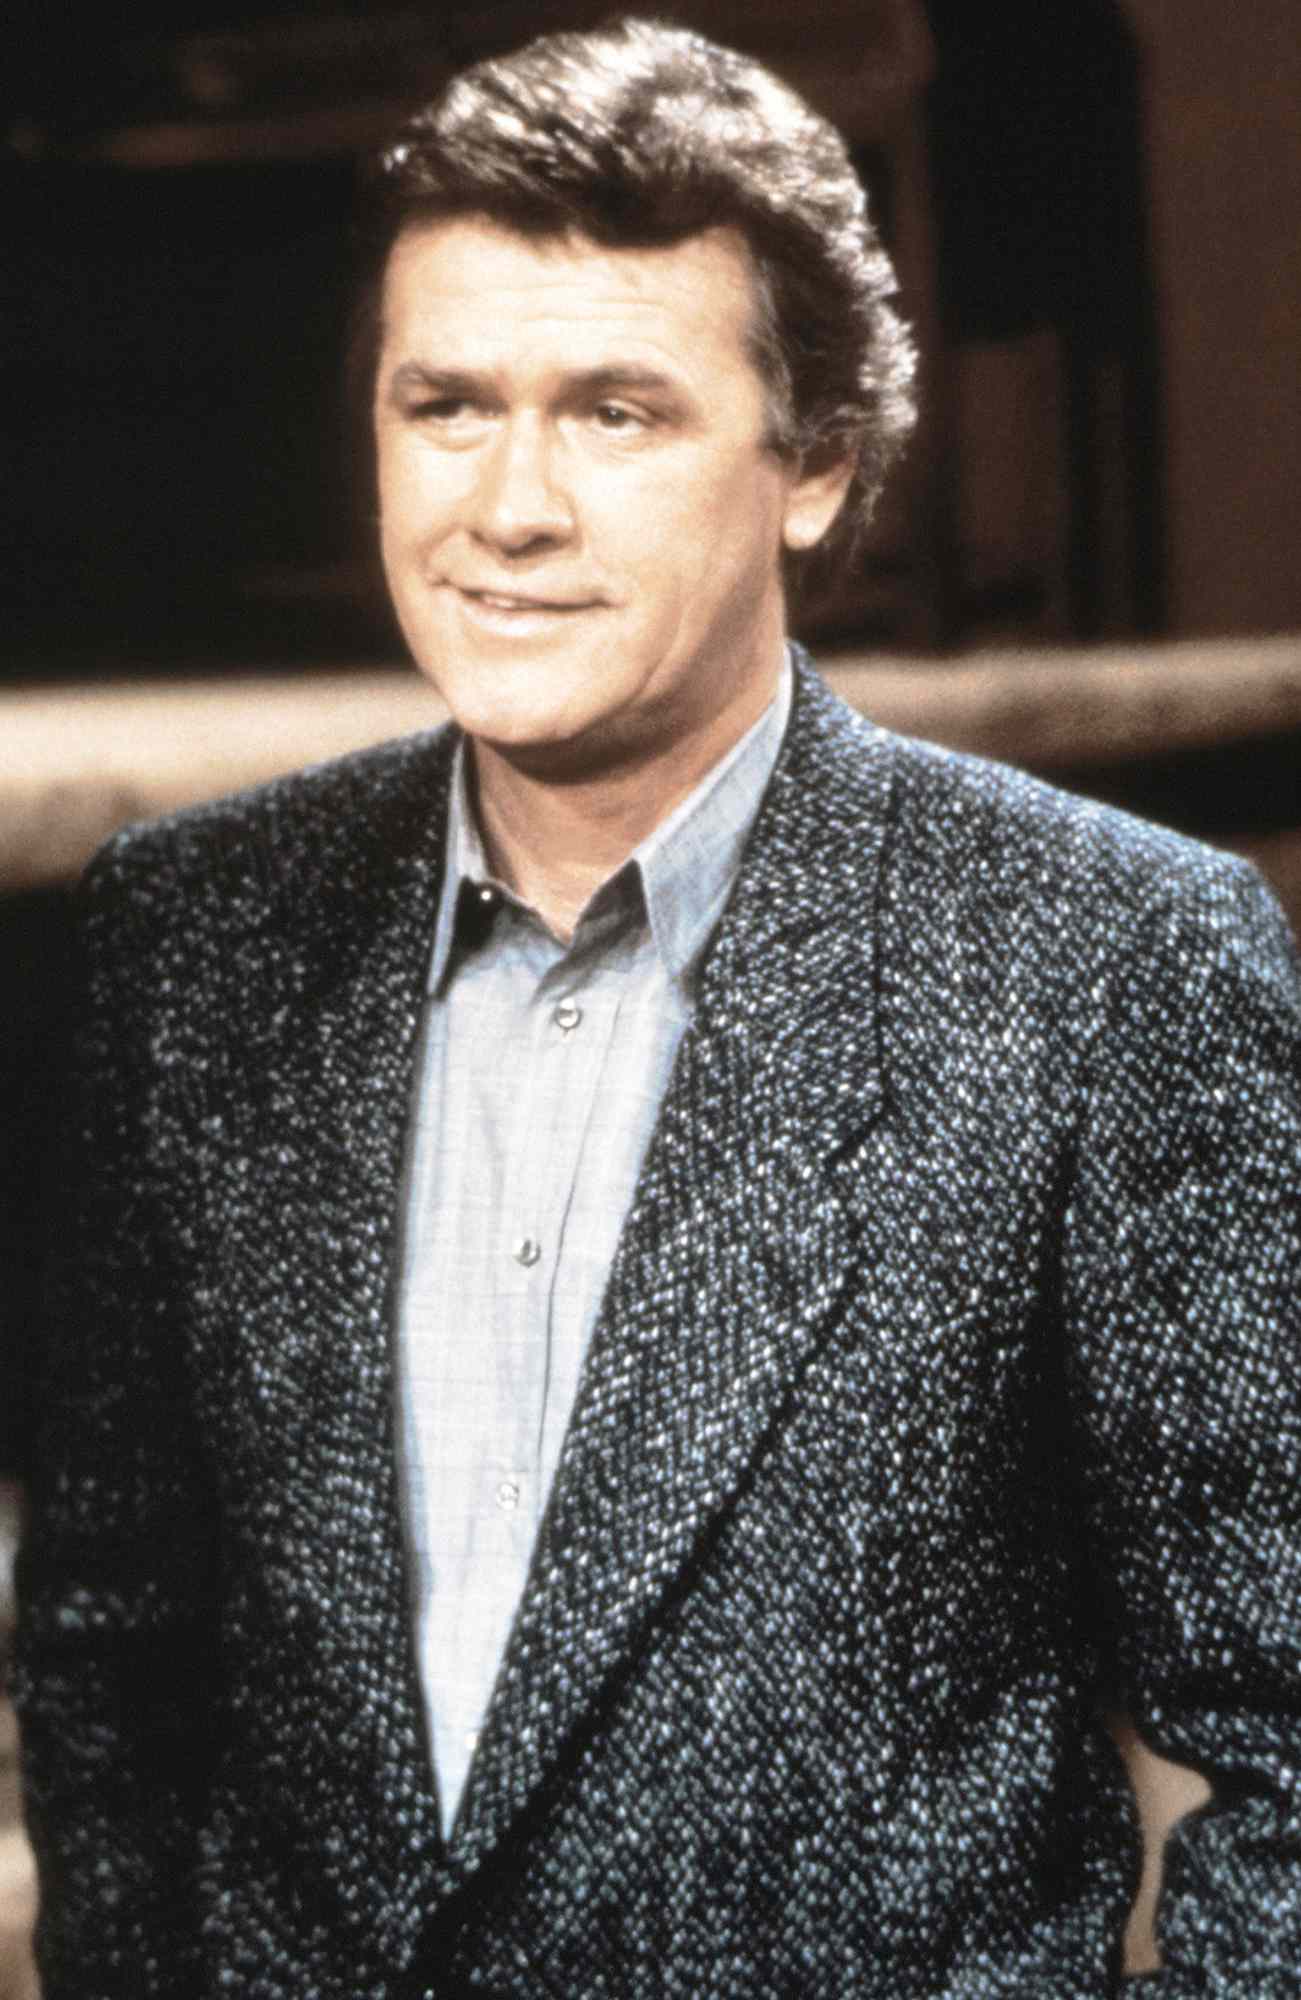 John Reilly, star of the soap opera and aluminum at the General Hospital, dies at 84